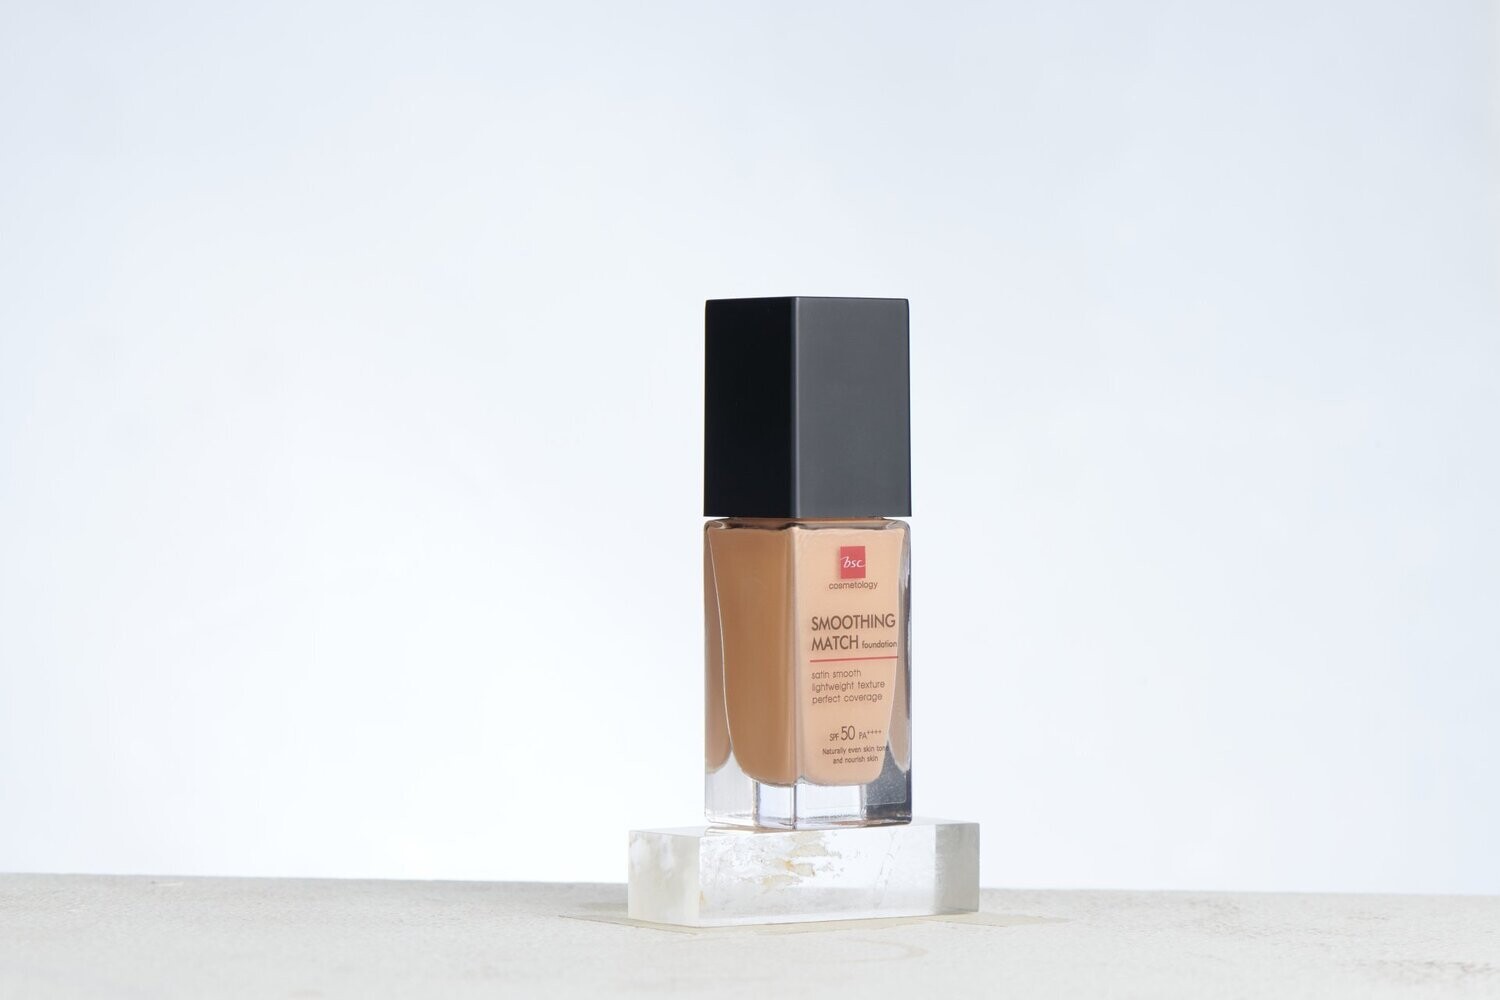 BSC SMOOTHING MATCH FOUNDATION SPF 50 PA++++